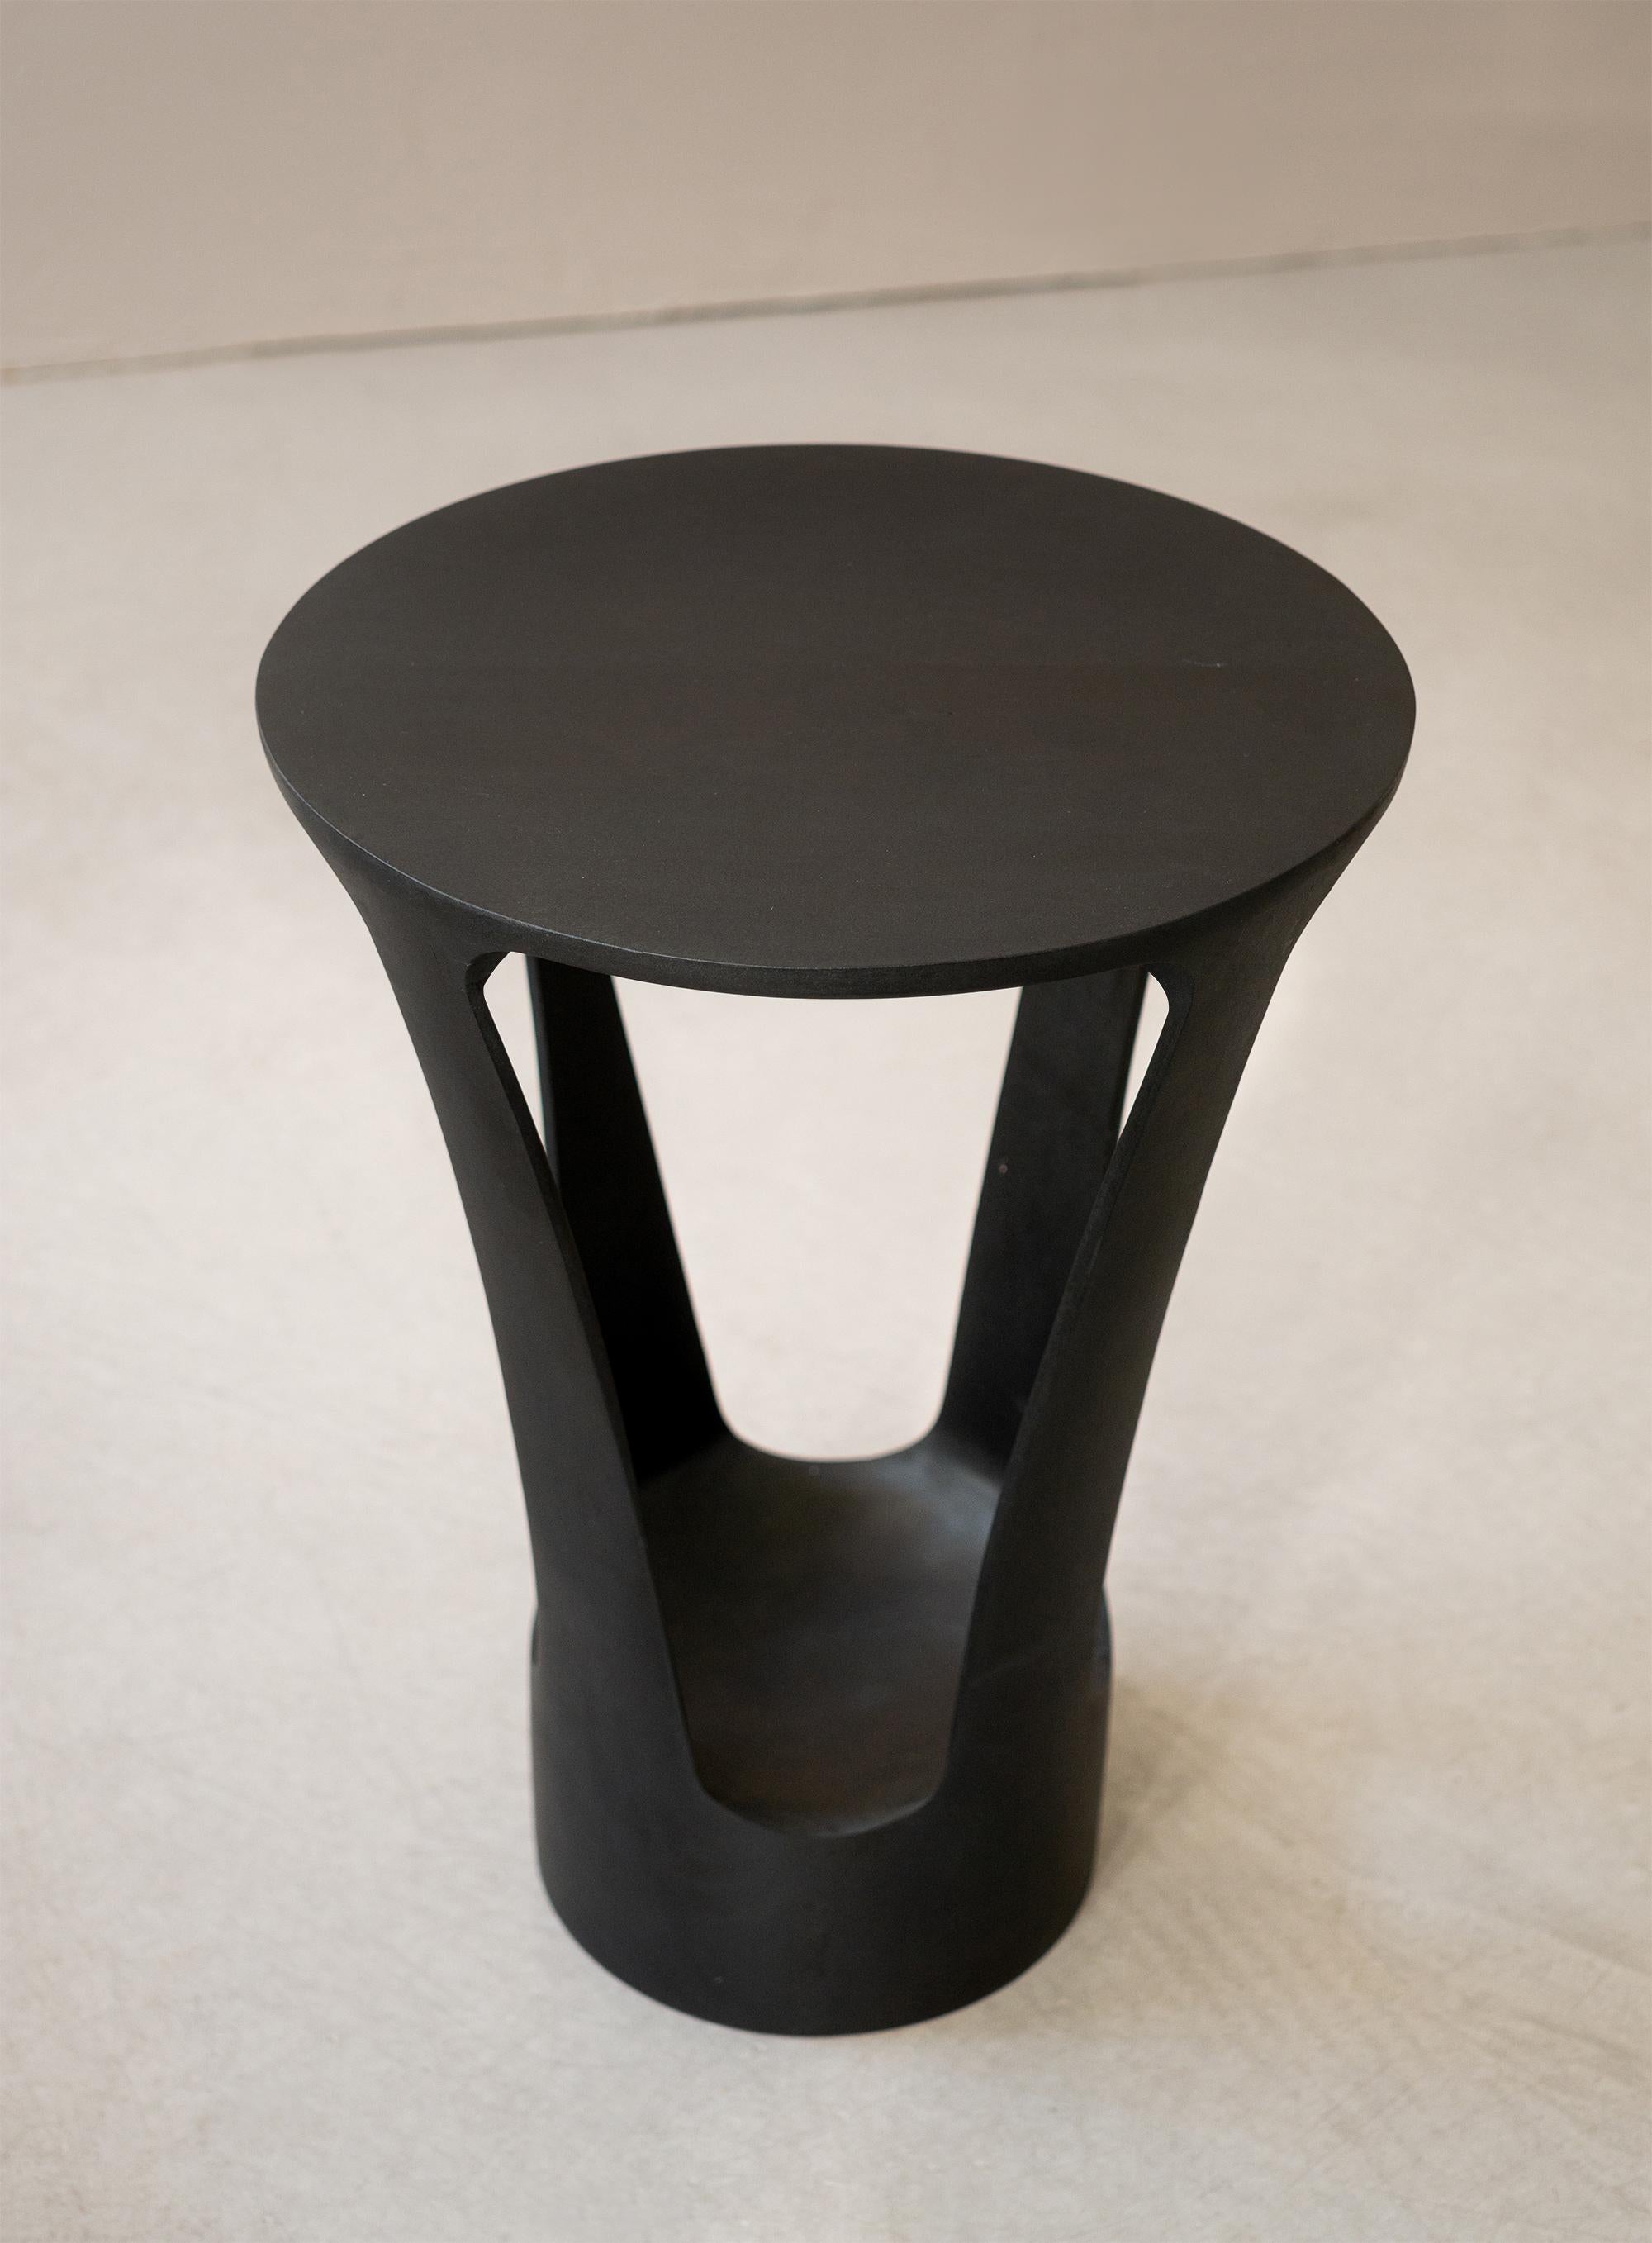 Pétiole pedestal table

Tinted ash pedestal table made by the designer Alexandre Labruyère in 2023. The Pétiole table is part of the Pétiole collection inspired by the natural principle of the petiole, the stem that attaches the leaf to the branch,